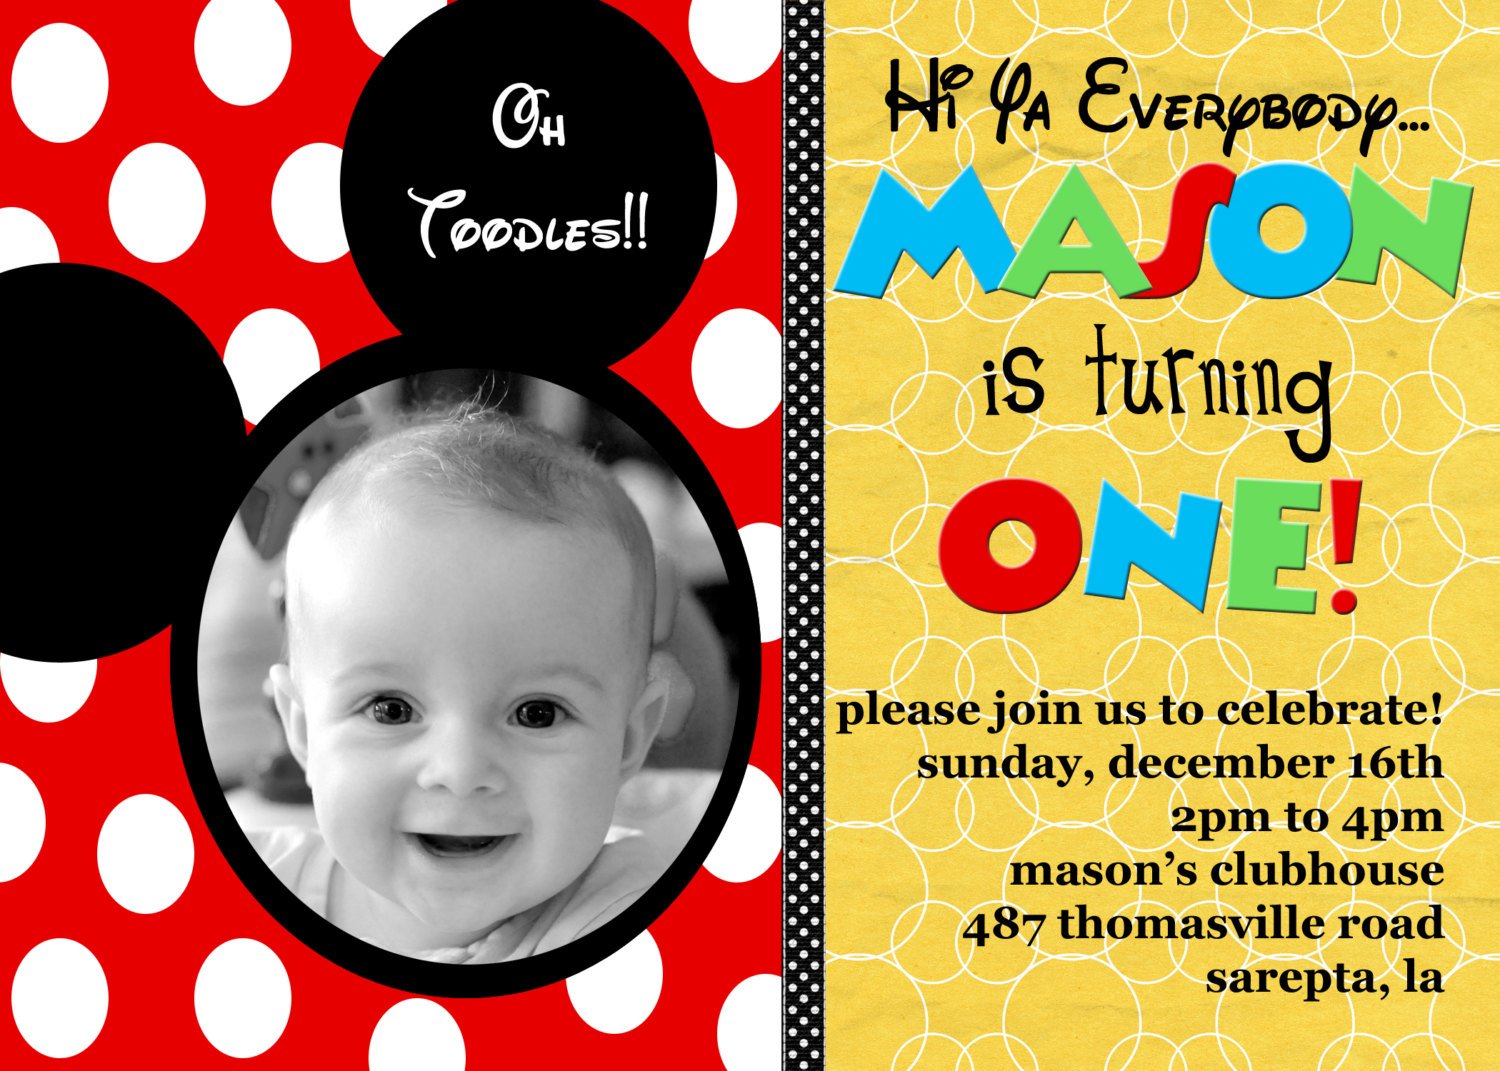 Personalized Mickey Mouse Birthday Invitations